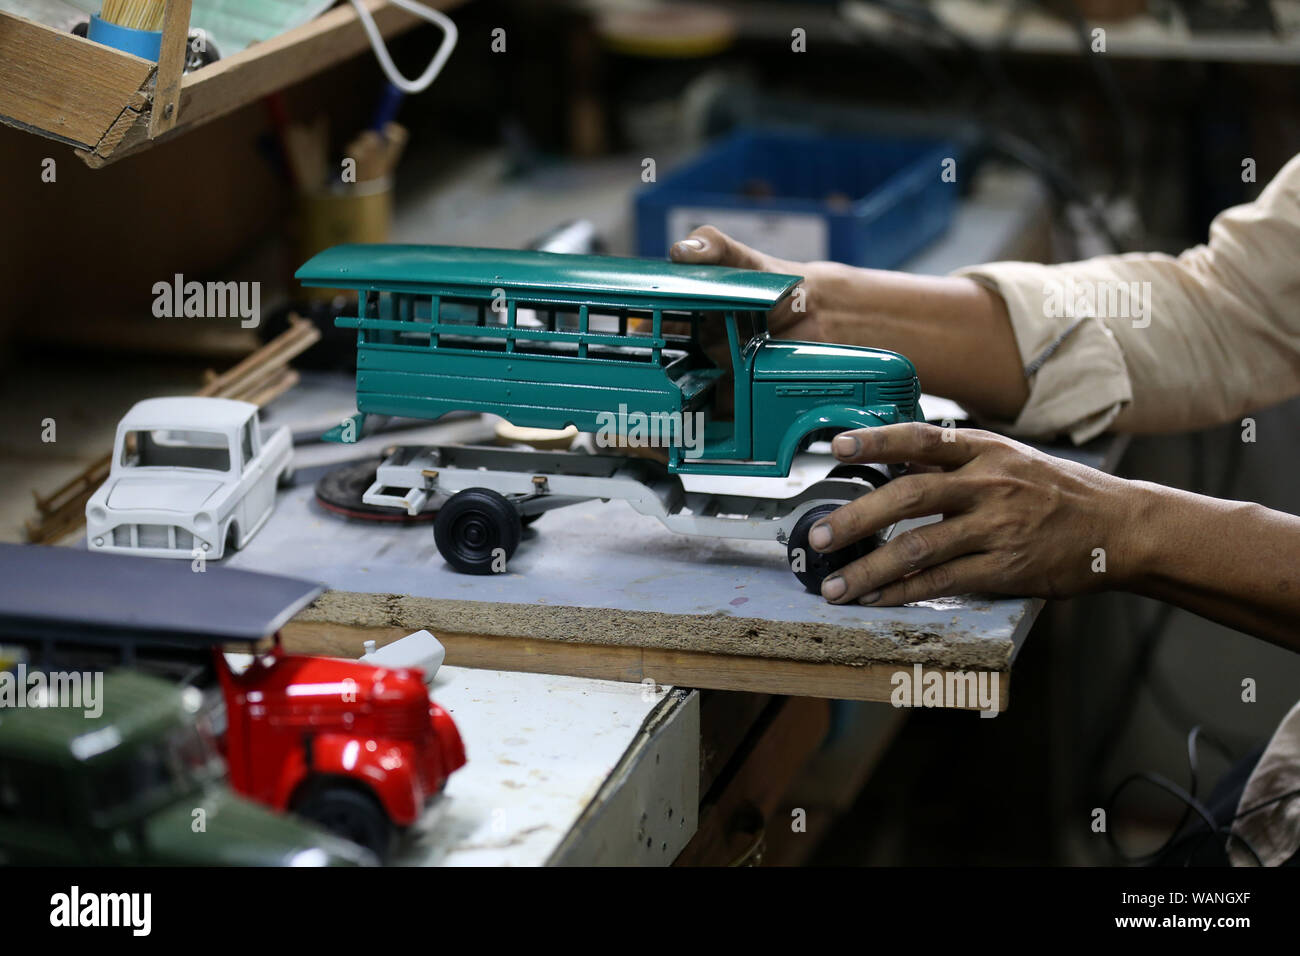 (190821) -- YANGON, Aug. 21, 2019 (Xinhua) -- Craftsman Zay Yar assembles a model car at his workroom in Yangon, Myanmar, Aug. 20, 2019. Zay Yar is a craftsman who has been making wooden miniatures of vehicles dated back to bygone era in Myanmar's largest city Yangon for three years. Being into old generations' vehicles produced around World War II and were broadly used as public transports in Myanmar, Zay Yar initiated his model making hobby in 2016 after working at a auto body shop for a decade. TO GO WITH:Feature: Myanmar craftsman makes wooden miniatures of vehicles from bygone era (Xinhu Stock Photo